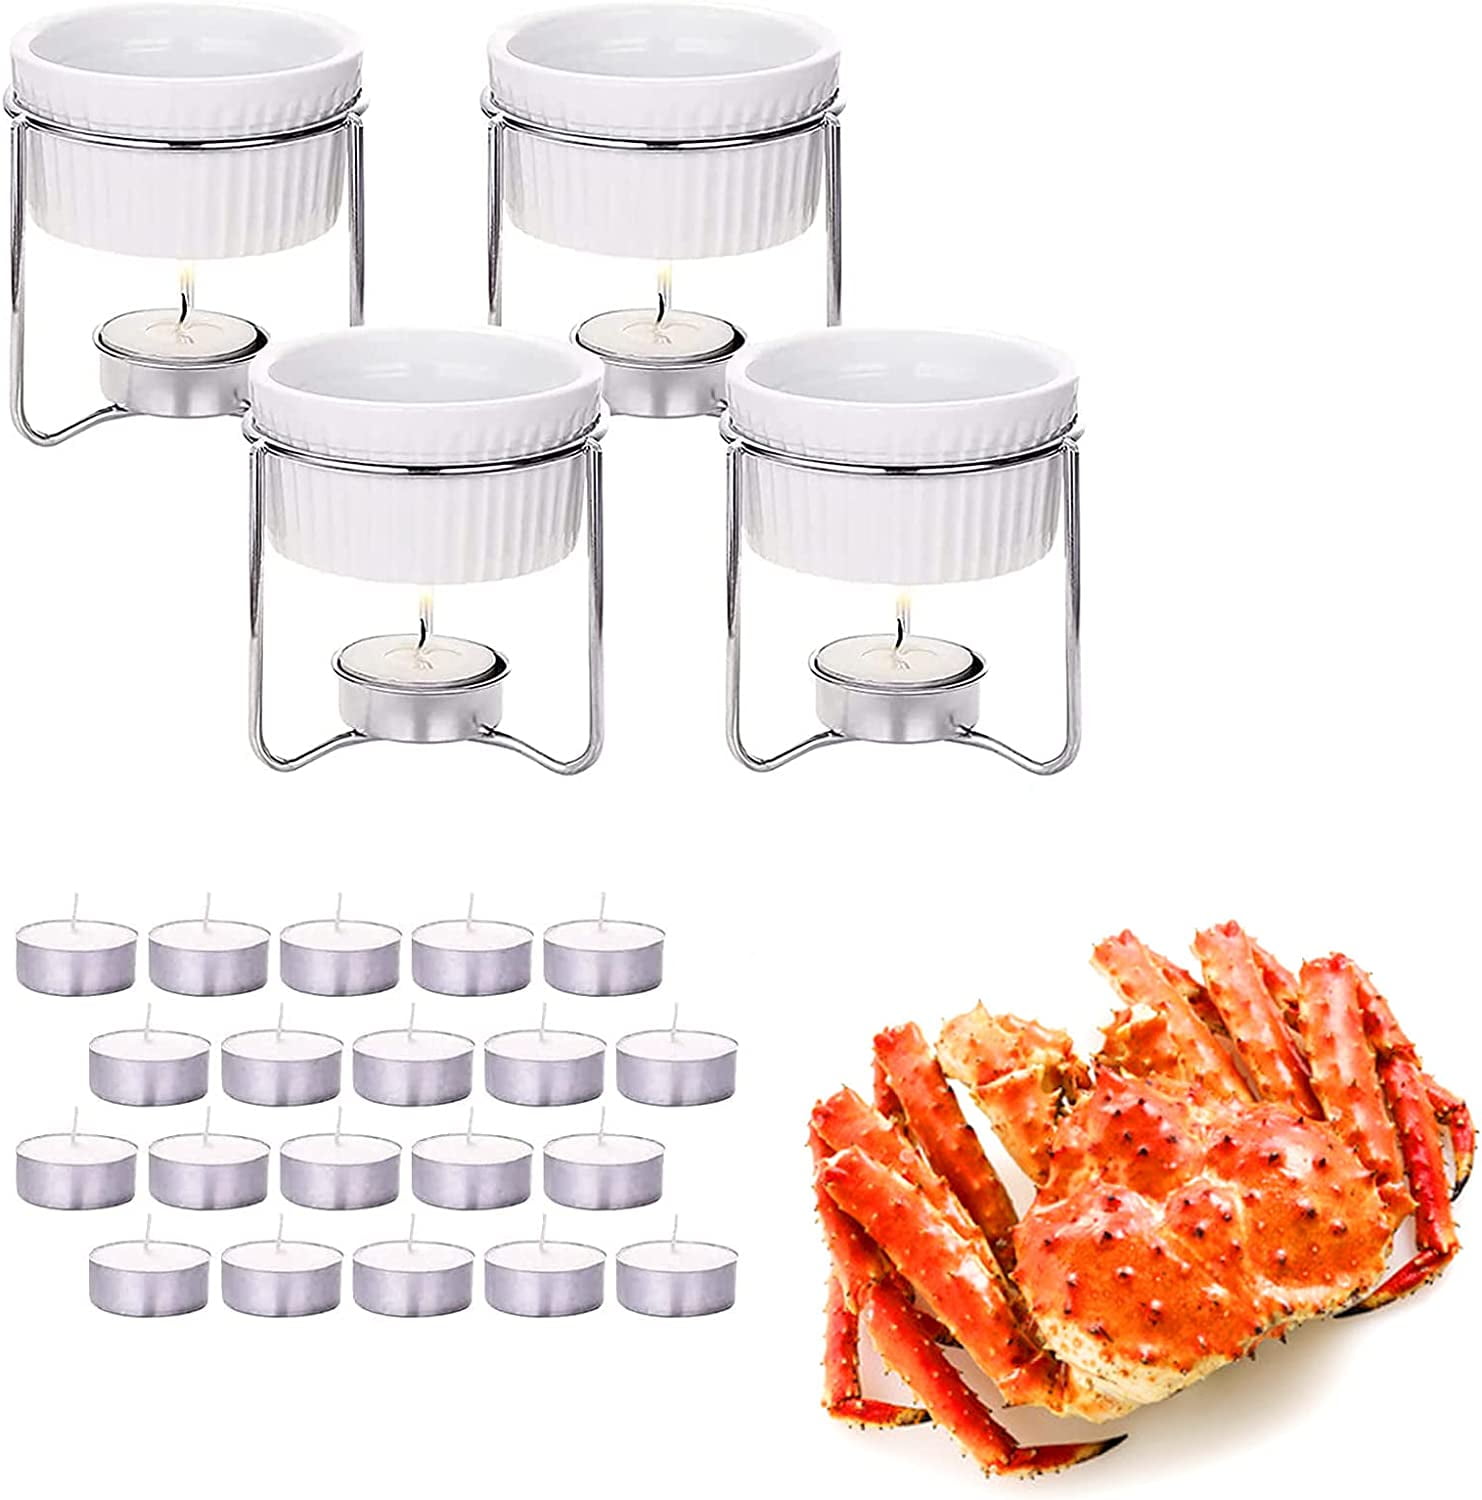 WhiteRhino 4 Pcs Ceramic Butter Warmers with 20Pcs tealight candles for  Seafood,Lobster or Cheese Fondue Set 